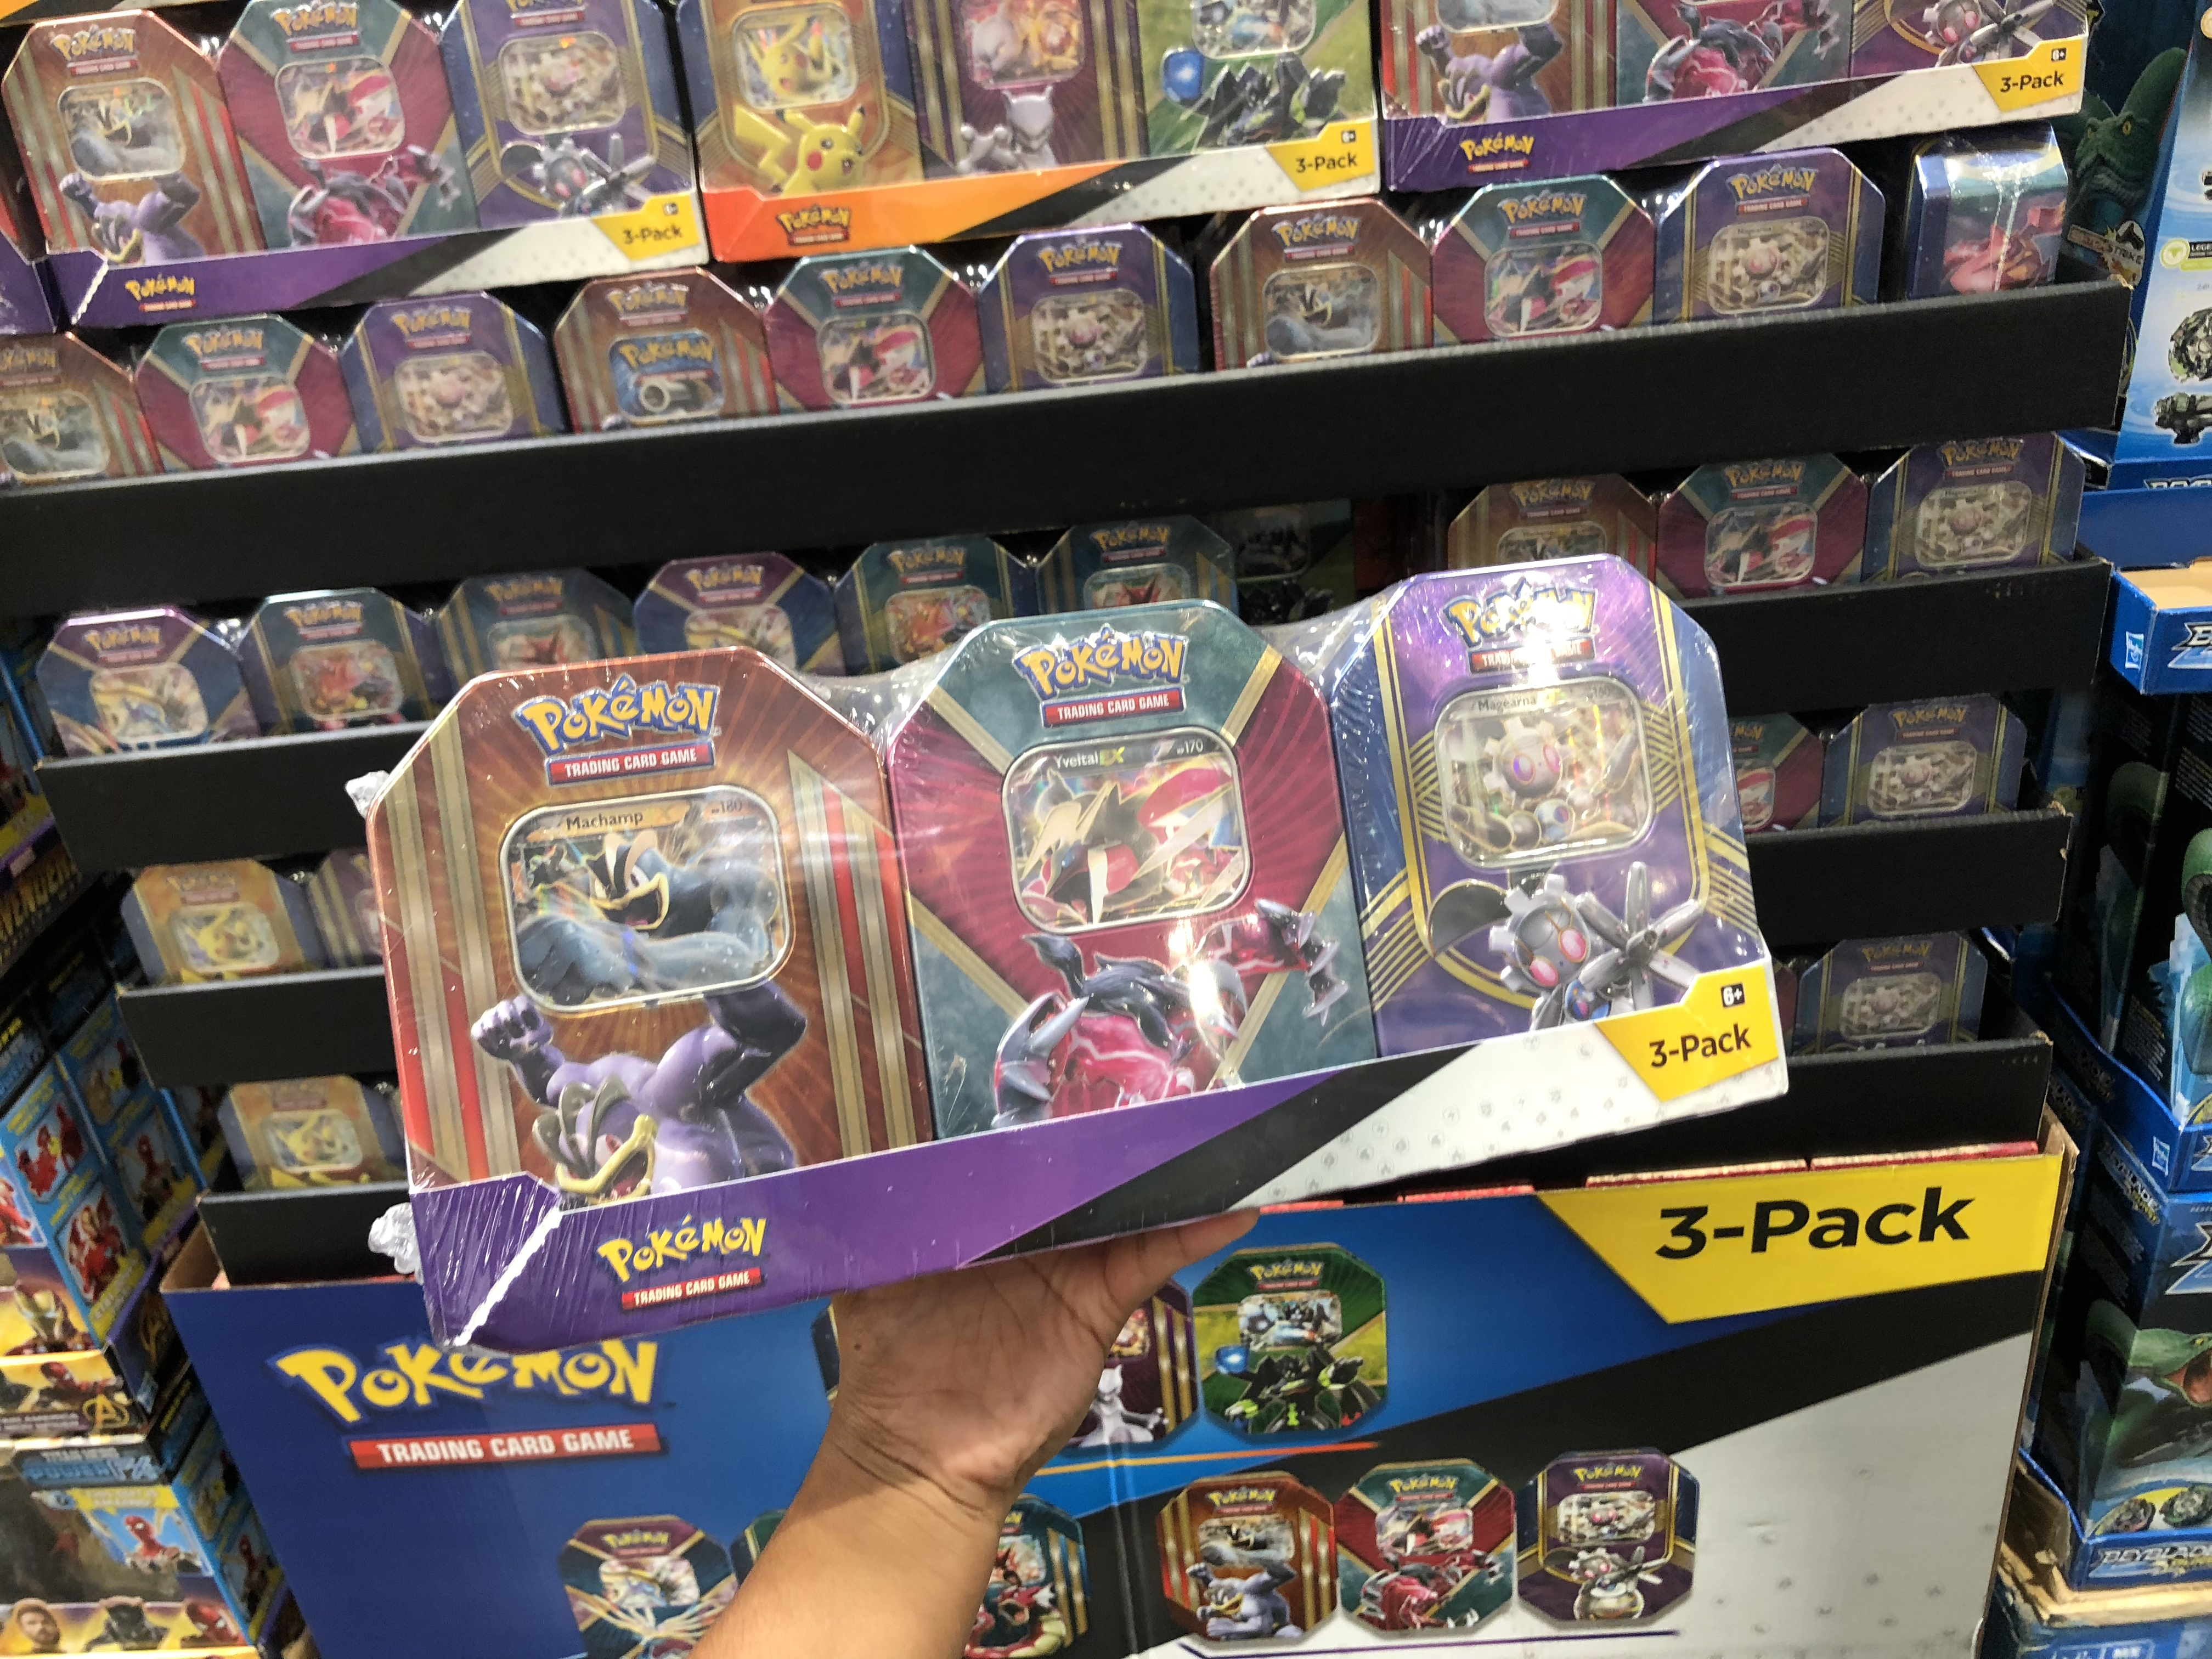 The best holiday toy deals for 2018 include Pokemon cards 3-packs at Costco